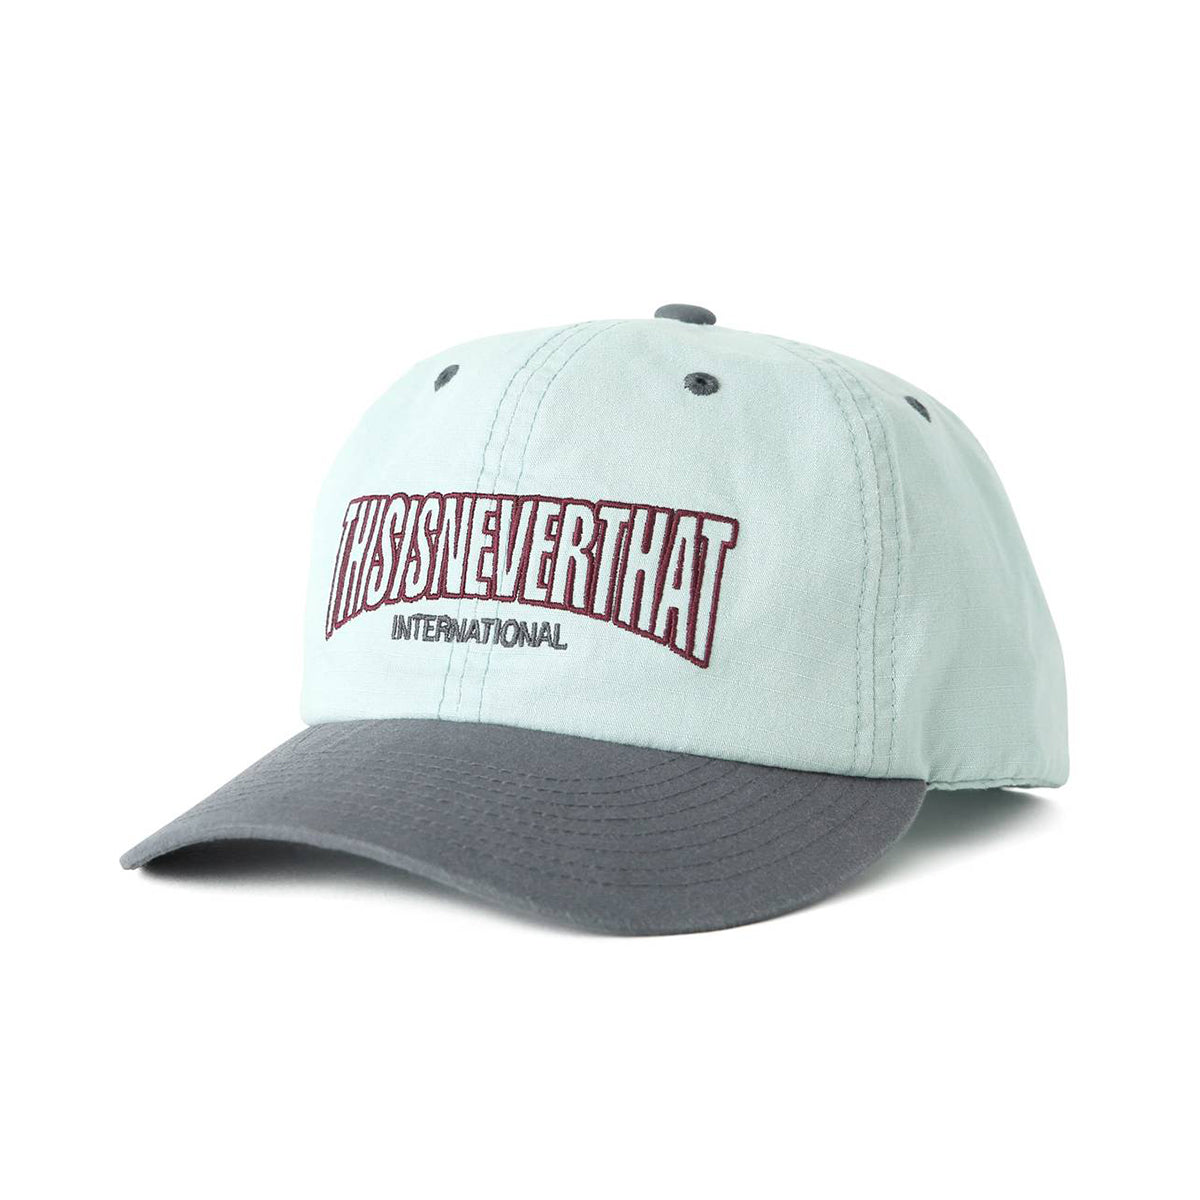 thisisneverthat - thisisneverthat - Ripstop Under Arch-Logo Cap - Pale Blue